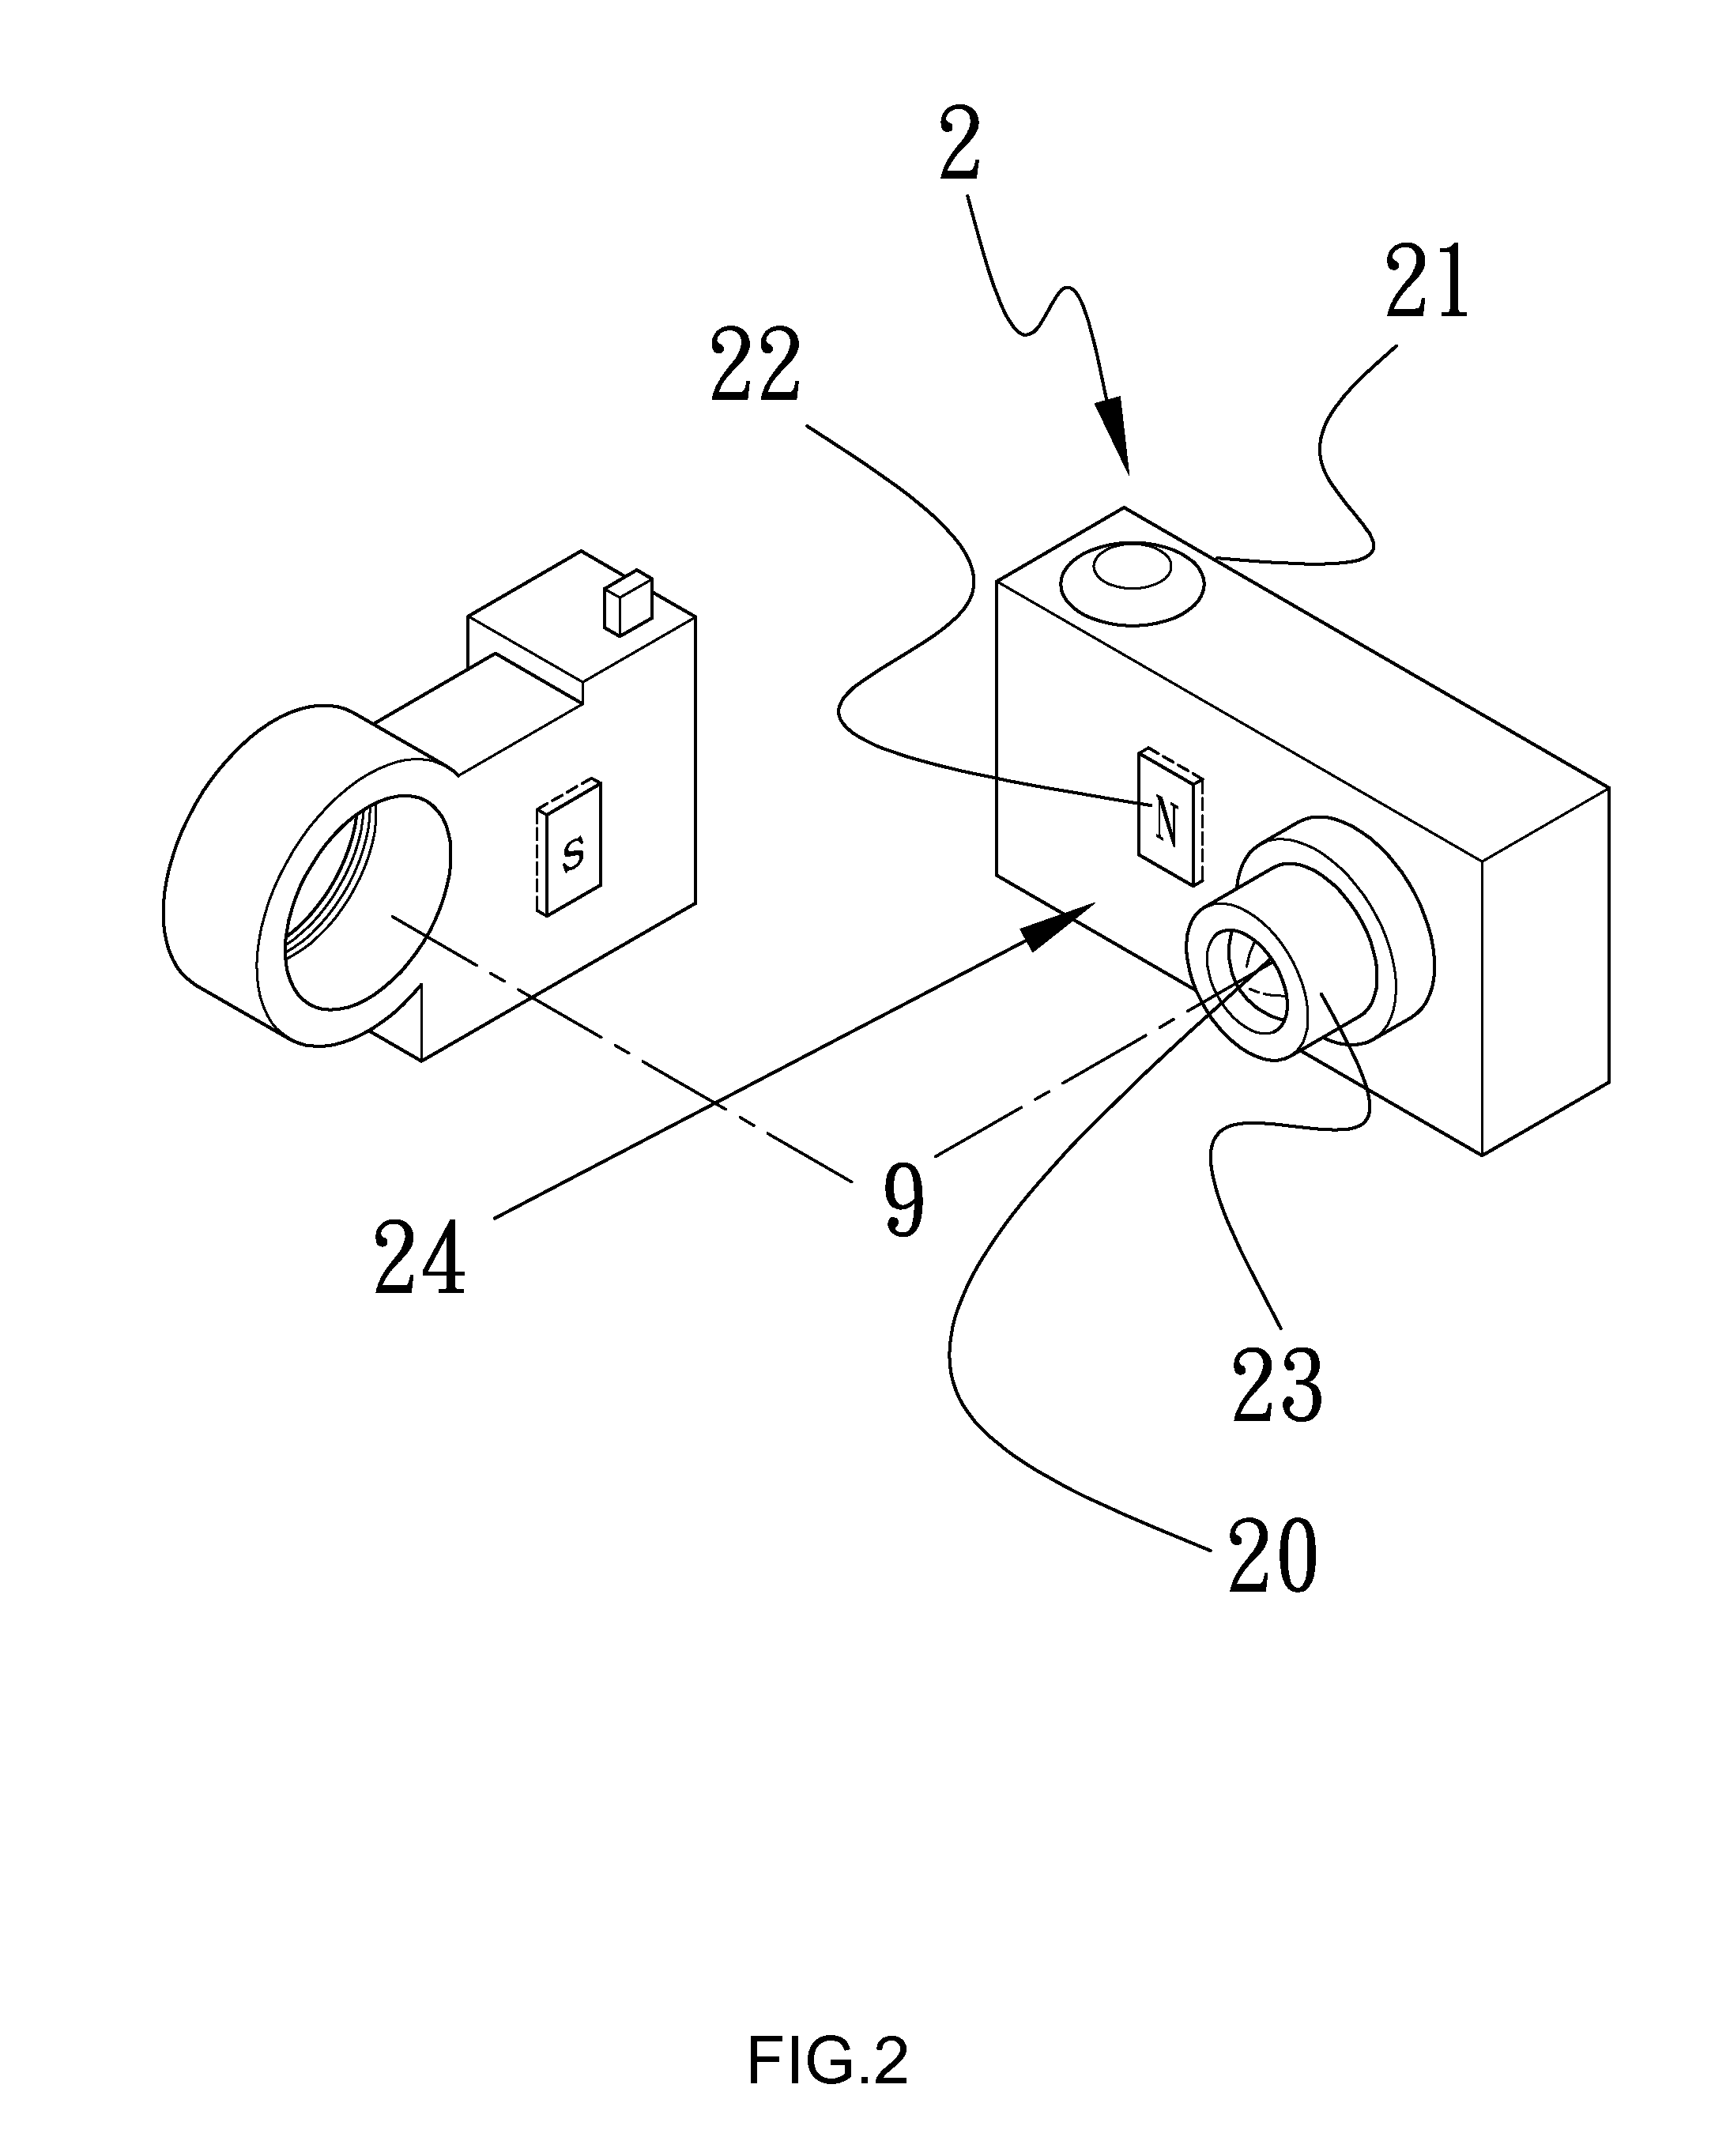 Lens connection module and connection adapter for same